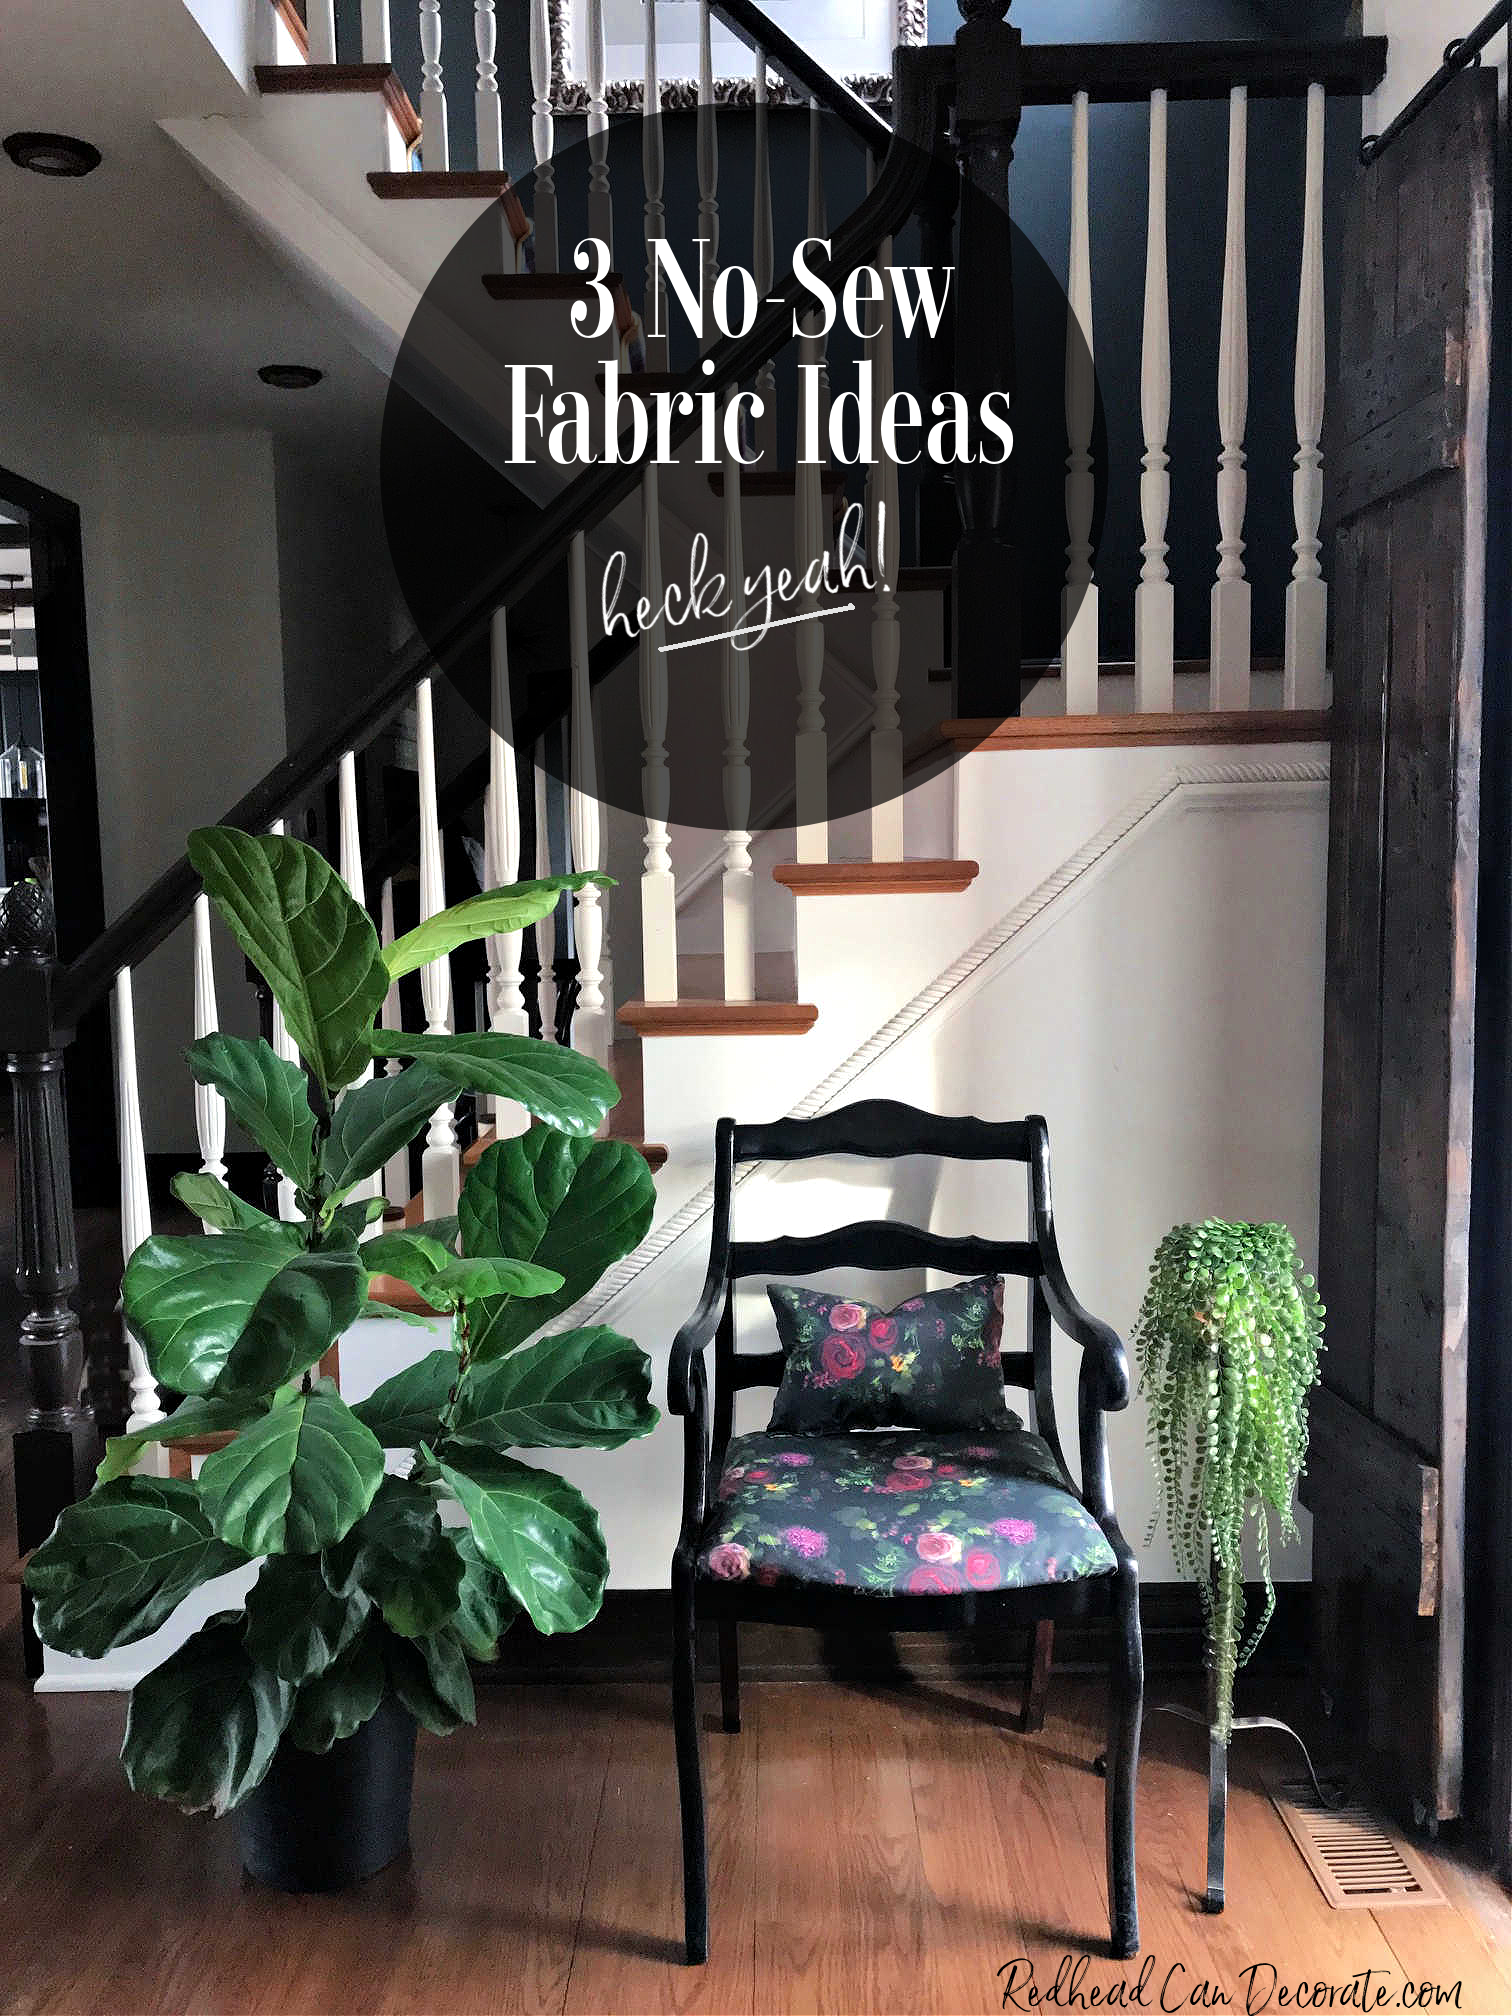 3 Simple No-Sew Home Decorating Ideas Using Fabric - Redhead Can